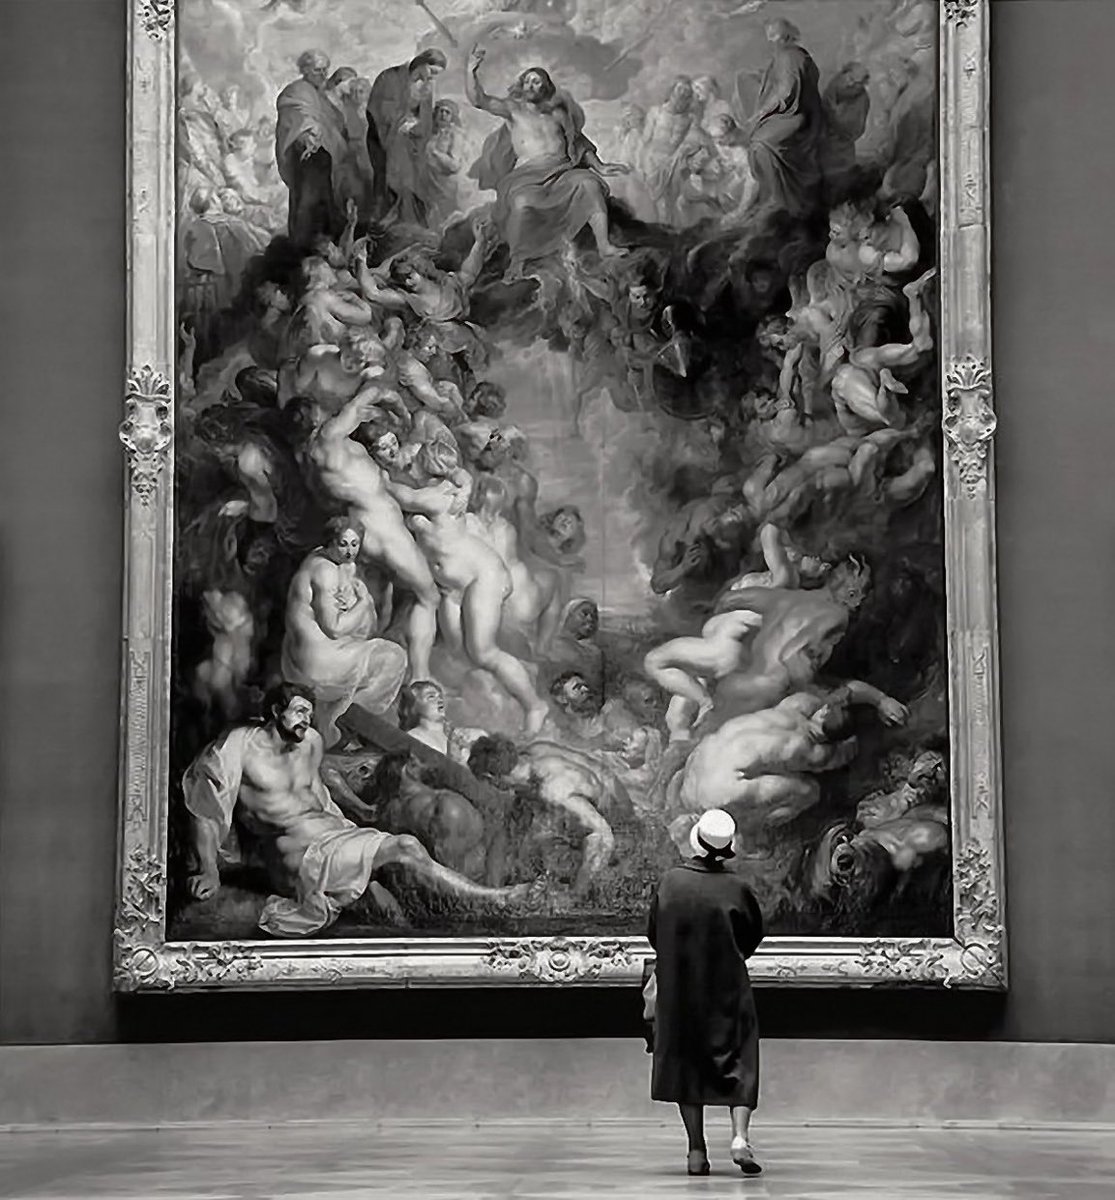 Rijksmuseum, Amsterdam, Photograph by Fritz Henle, 1960s. Painting by Rubens ‘The Last Judgement’ 1617.